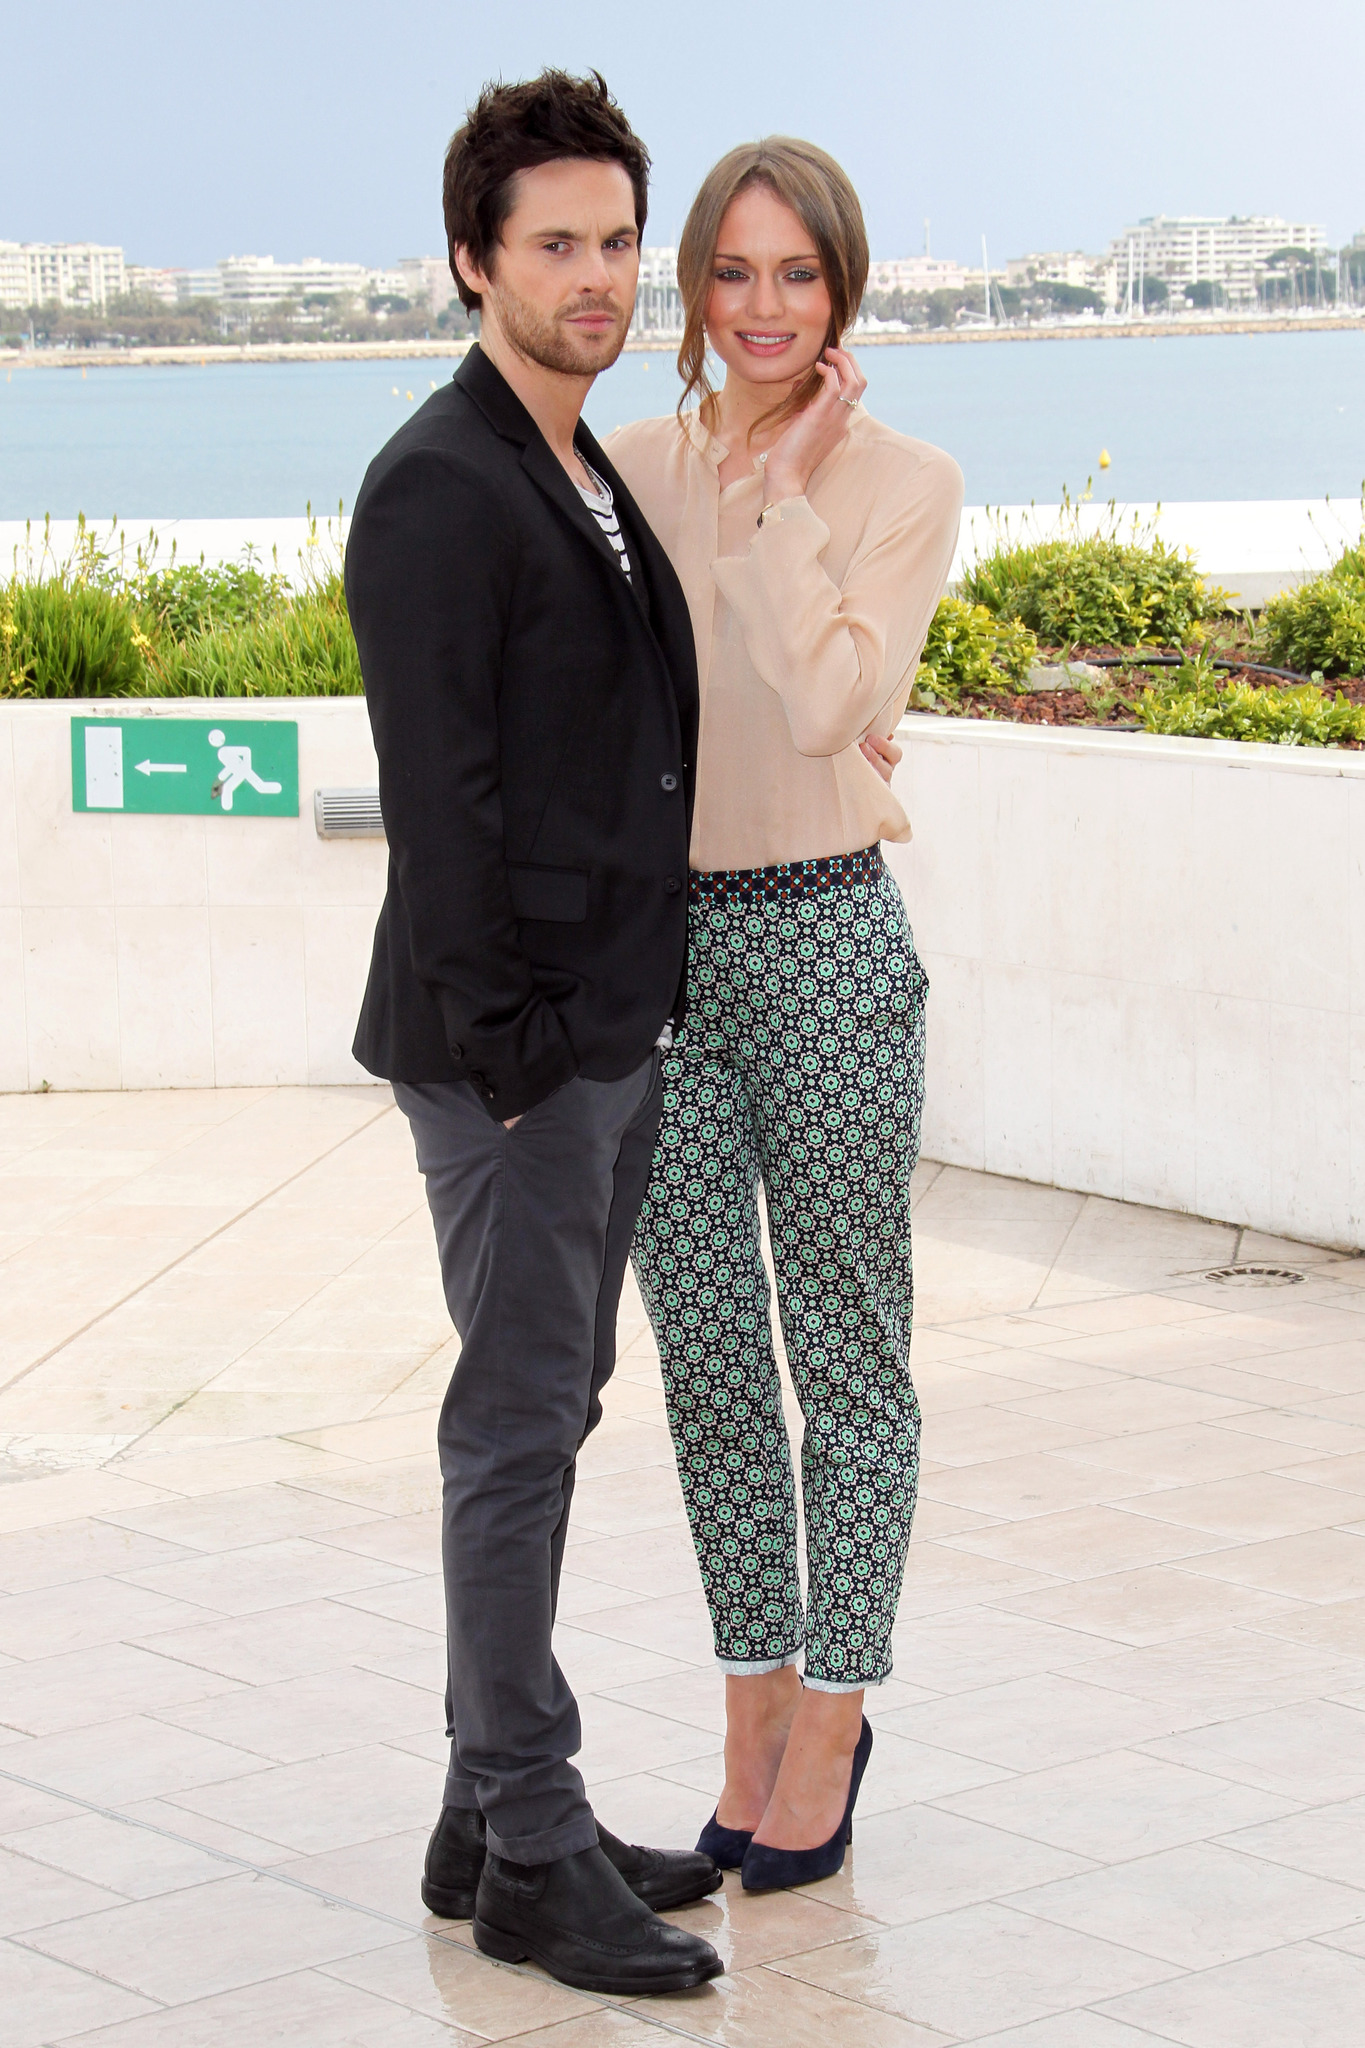 Tom Riley and Laura Haddock attend photocall for the TV serie 'Da Vinci's Demons' at MIP TV 2013 on April 8, 2013 in Cannes, France.